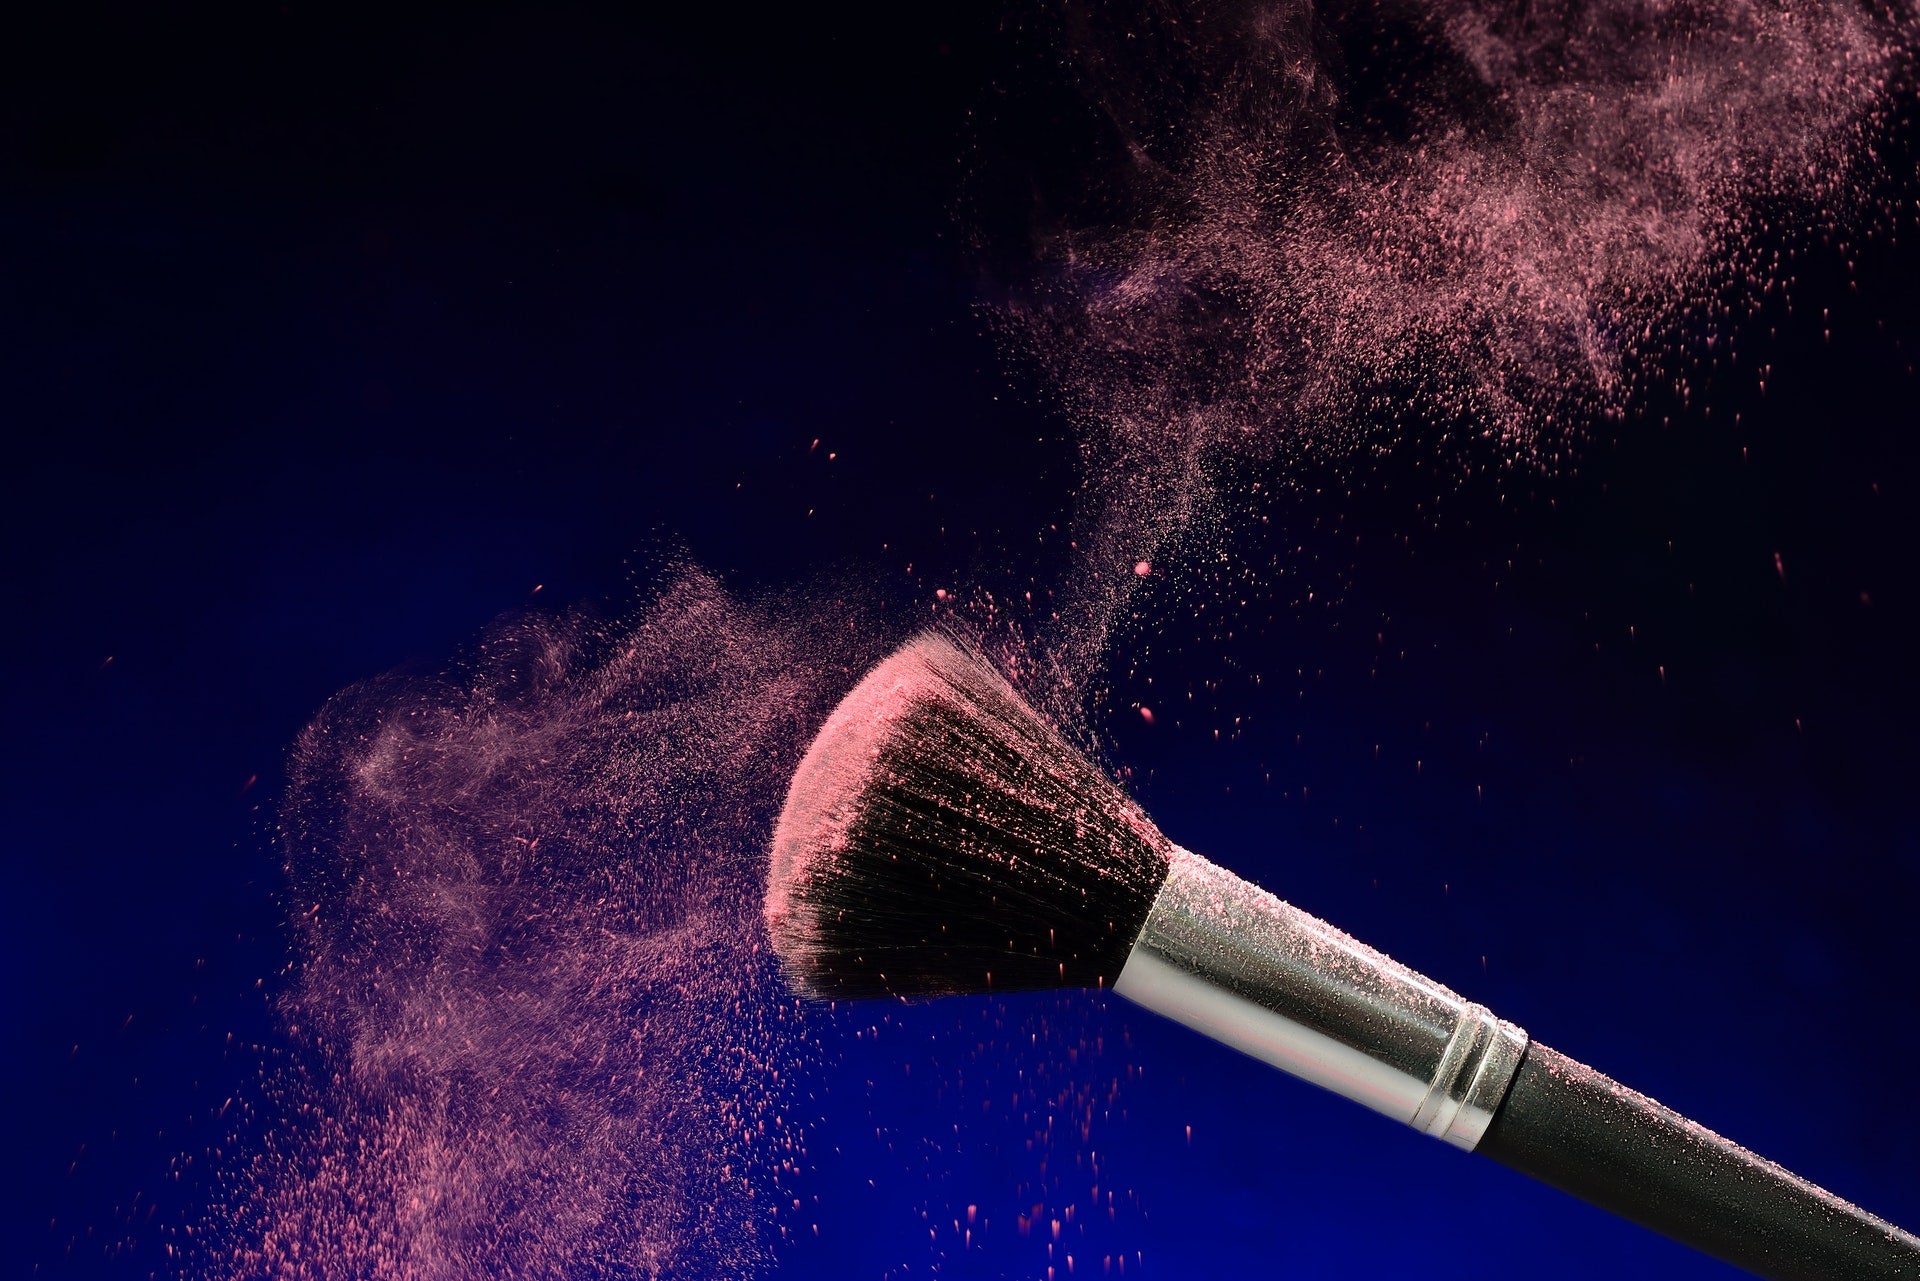 How to clean makeup brushes quickly